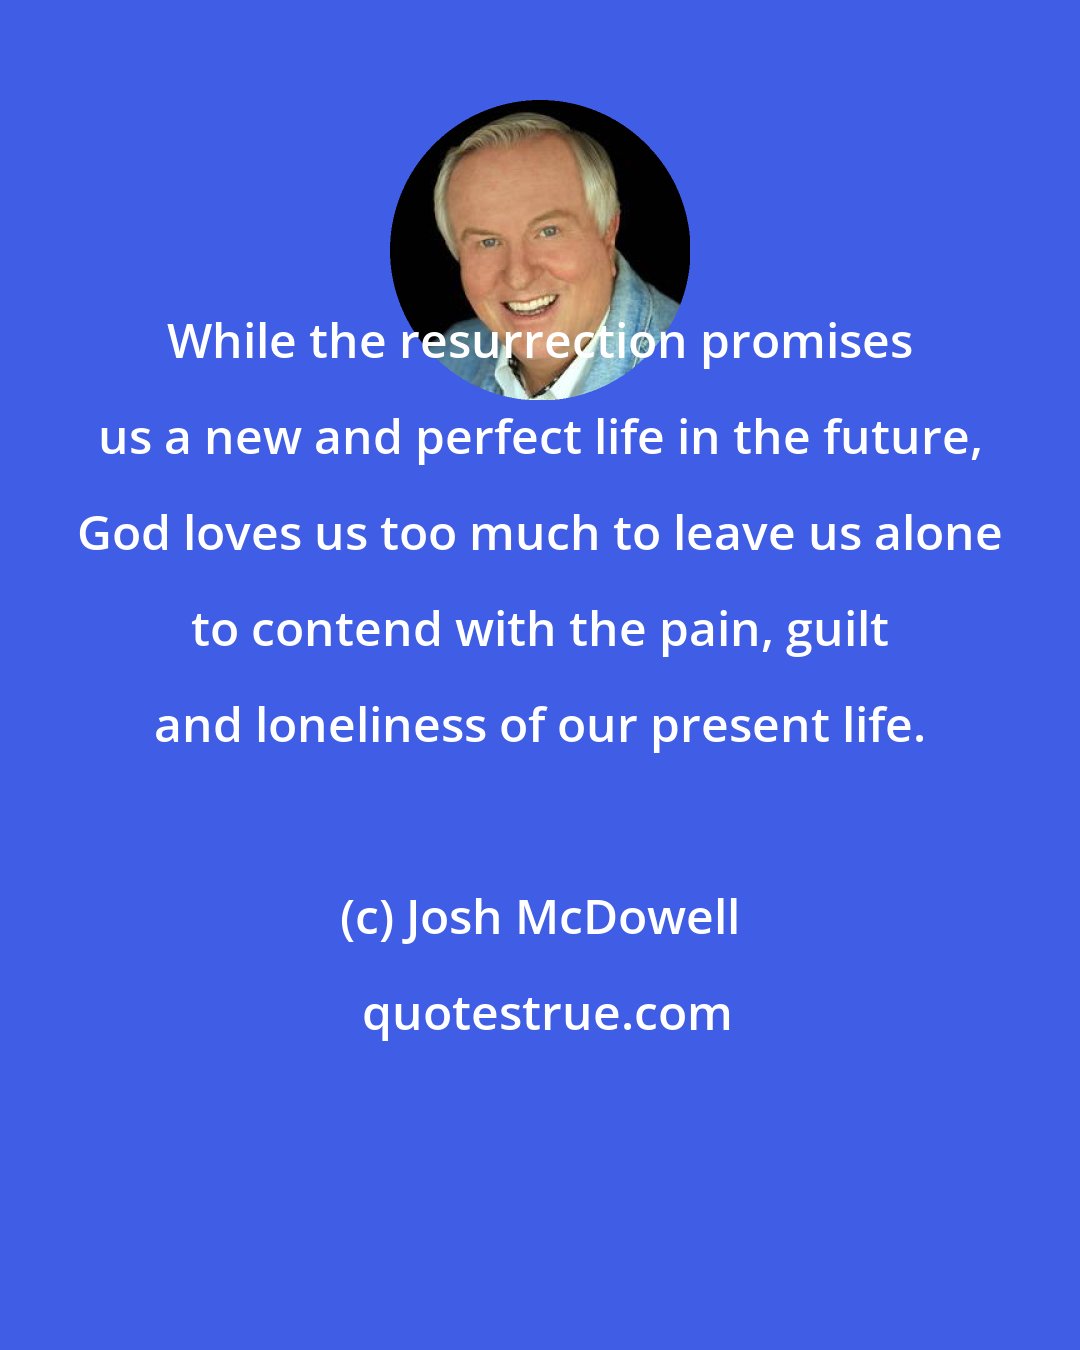 Josh McDowell: While the resurrection promises us a new and perfect life in the future, God loves us too much to leave us alone to contend with the pain, guilt and loneliness of our present life.